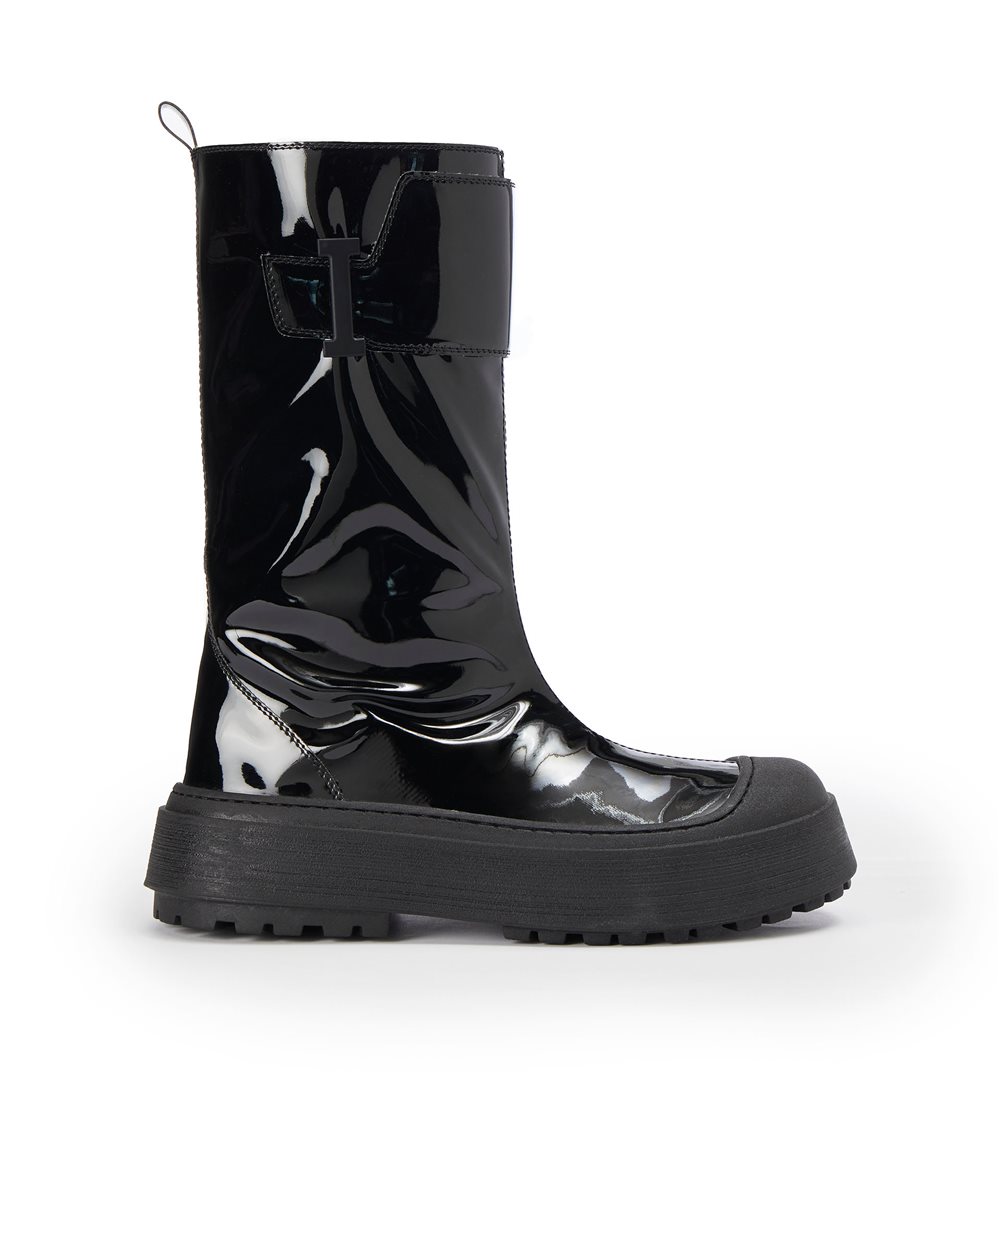 Patent leather boots | Iceberg - Official Website